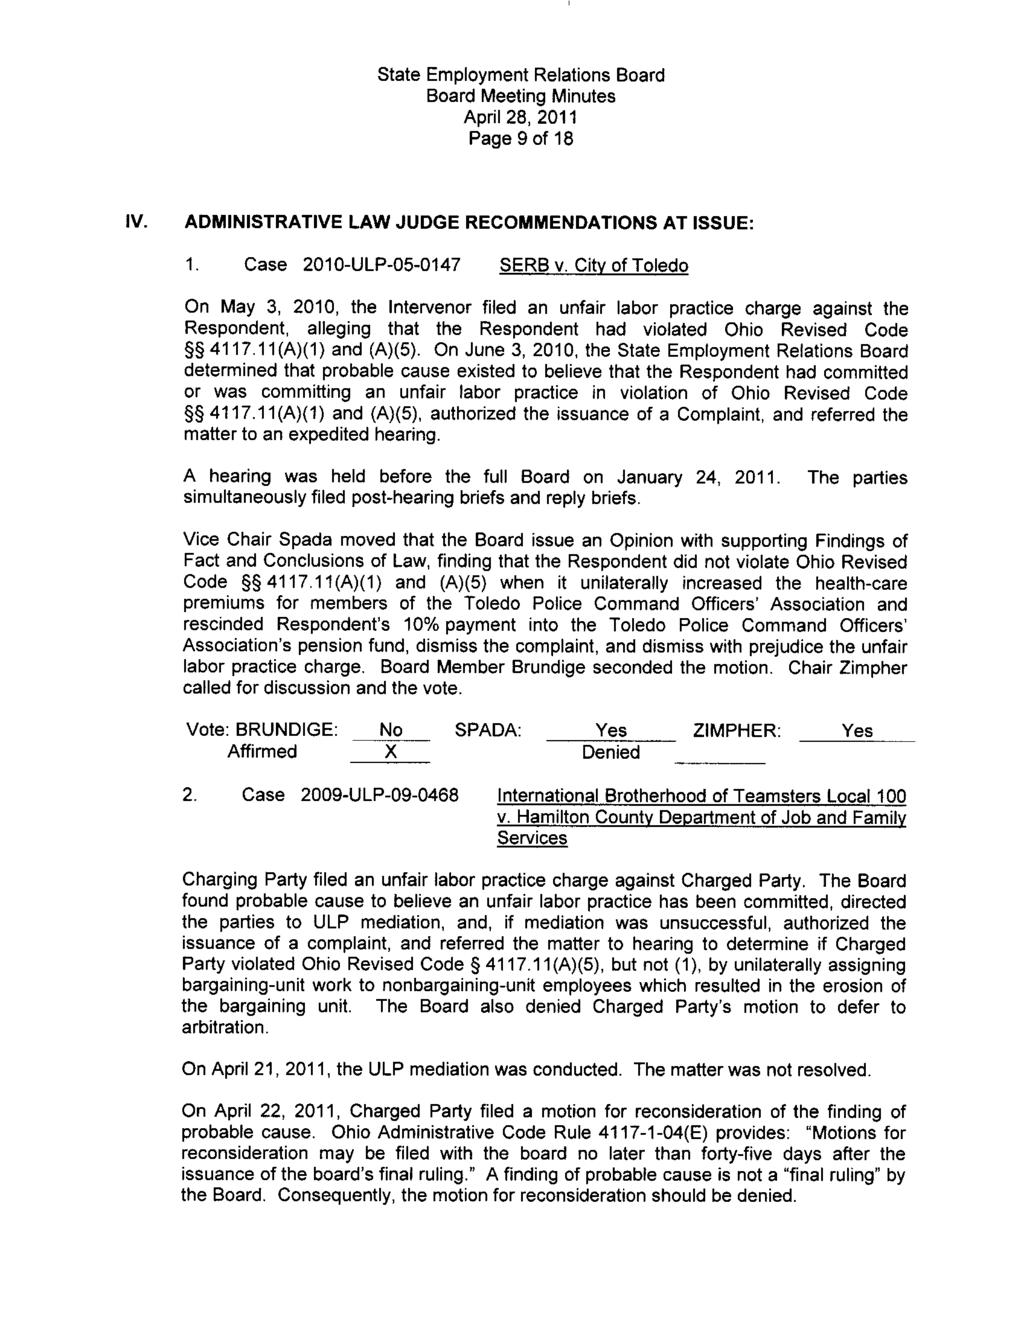 Page 9 of 18 IV. ADMINISTRATIVE LAW JUDGE RECOMMENDATIONS AT ISSUE: 1. Case 2010-ULP-05-0147 SERB v.